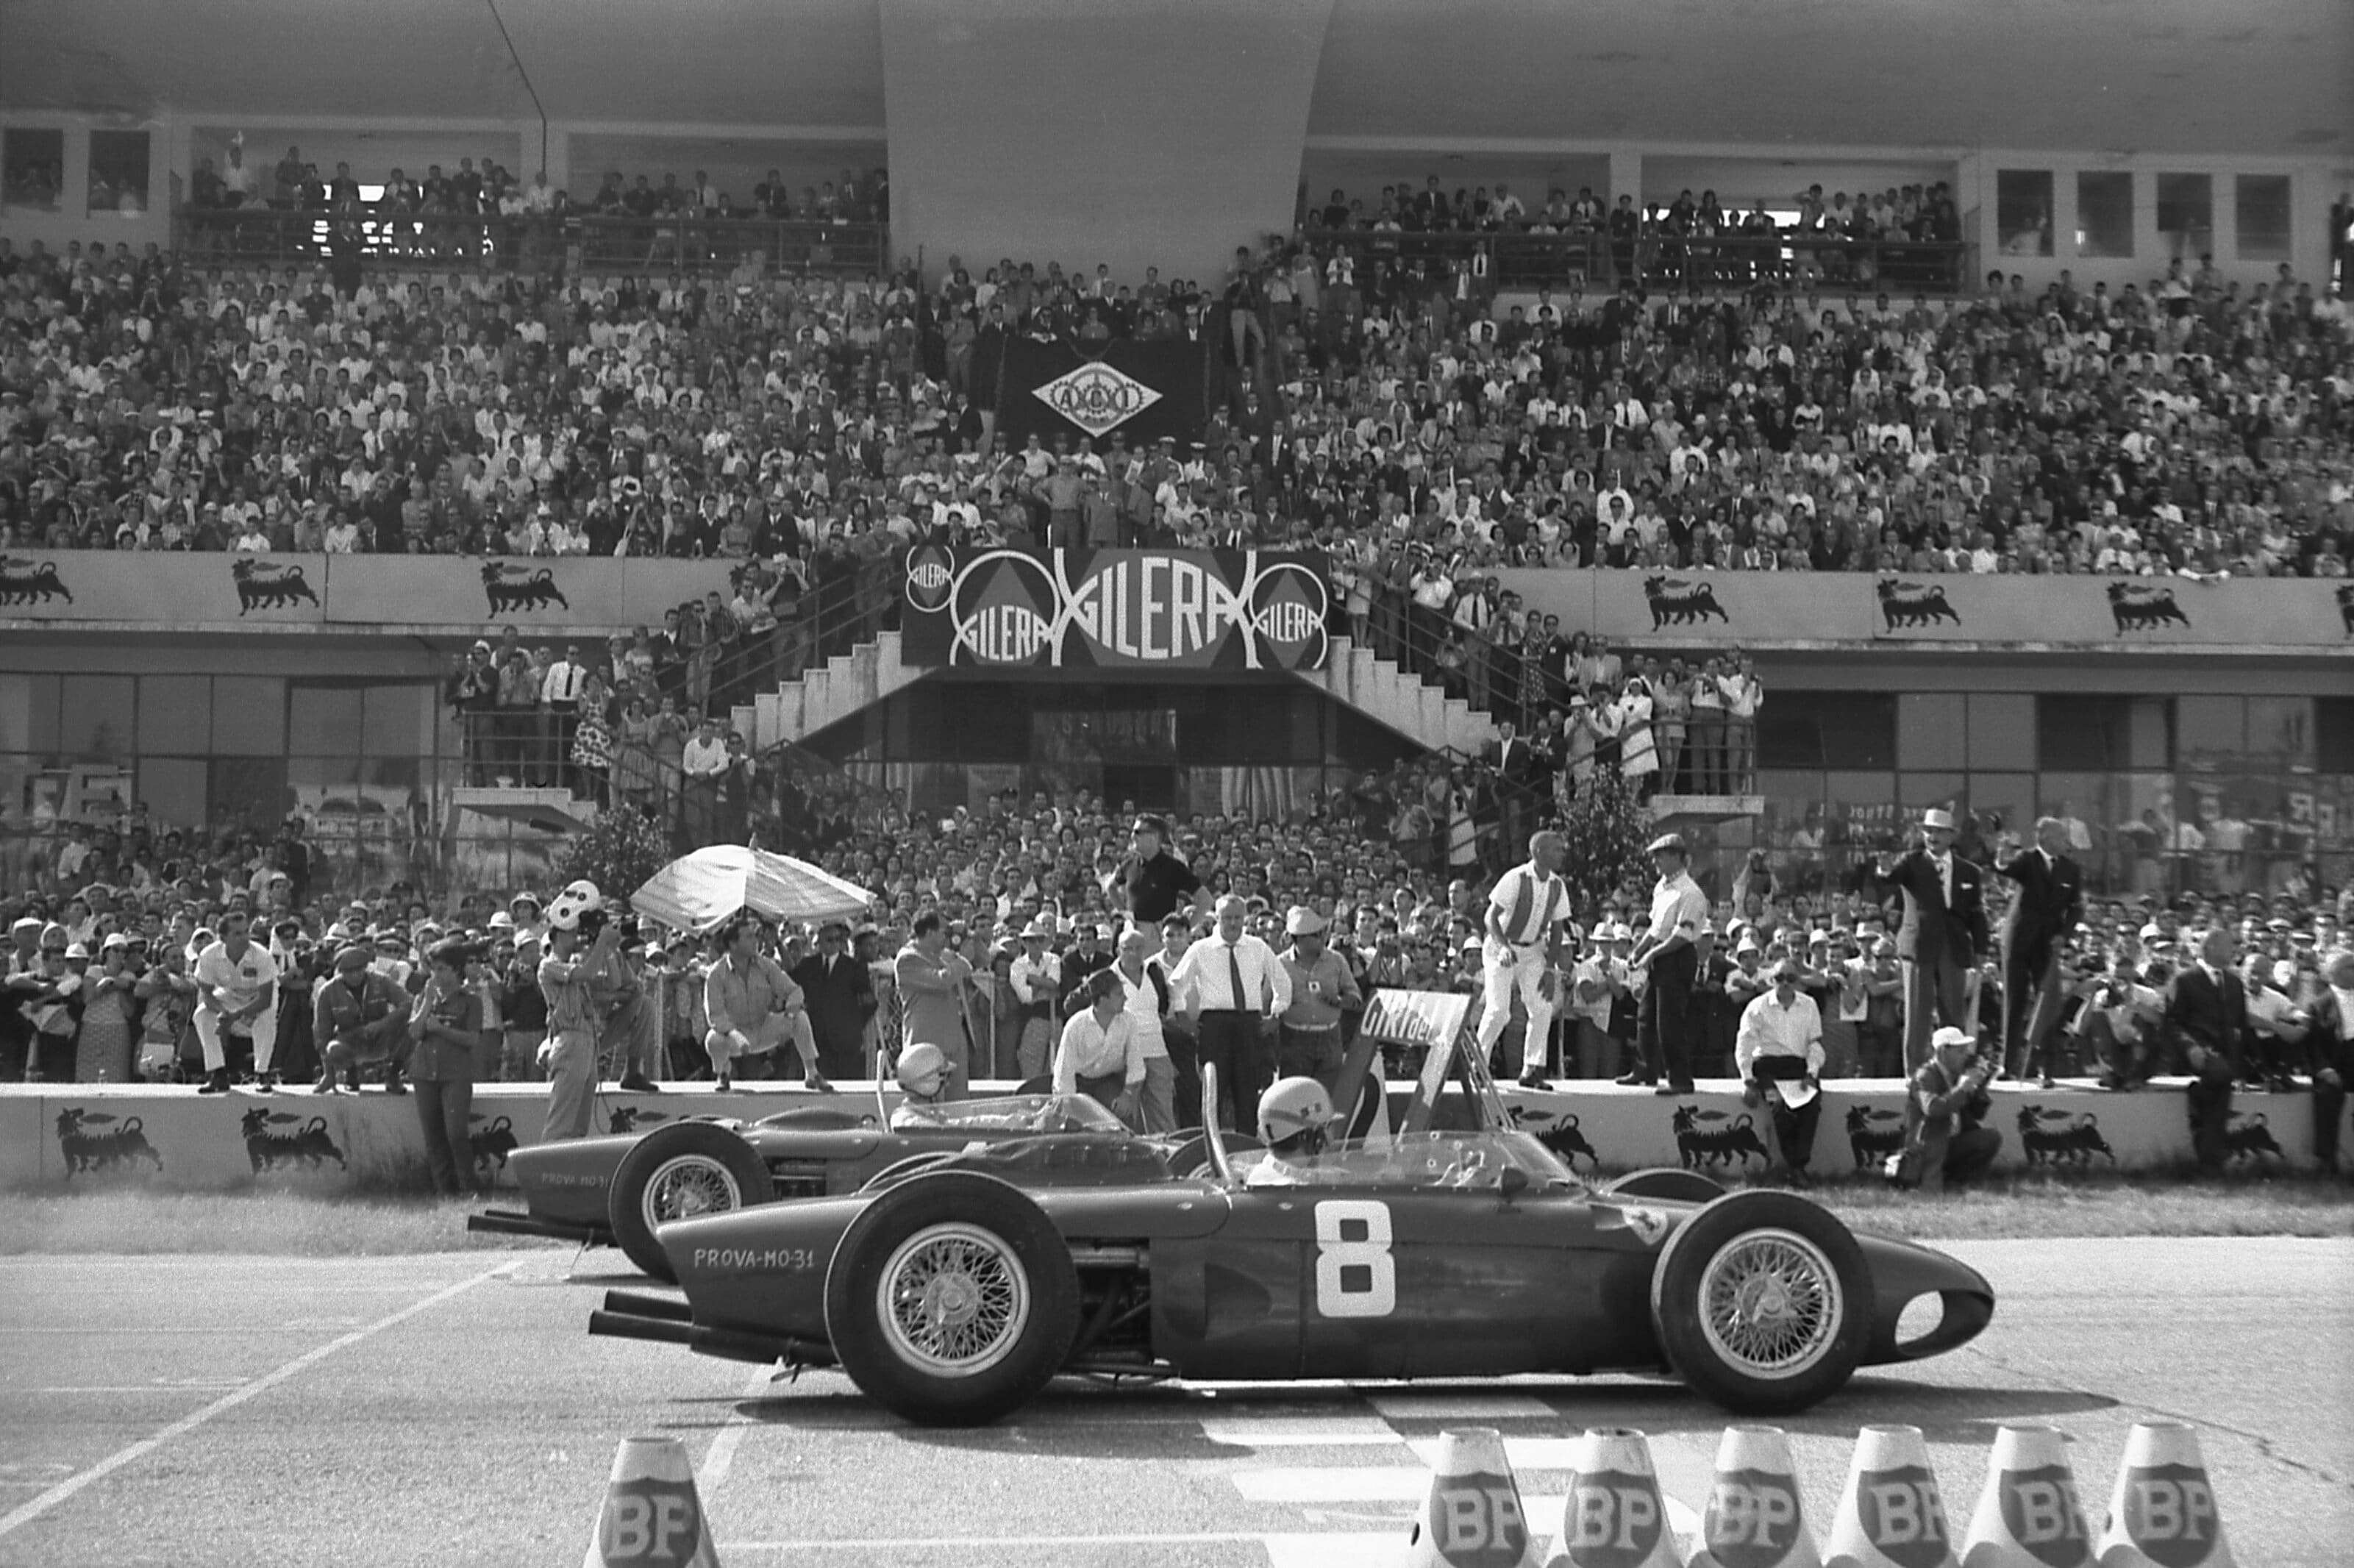 Ricardo Rodriguez (car no.8) and Wolfgang von Trips (car no.6) on the front row of the grid at Monza. 